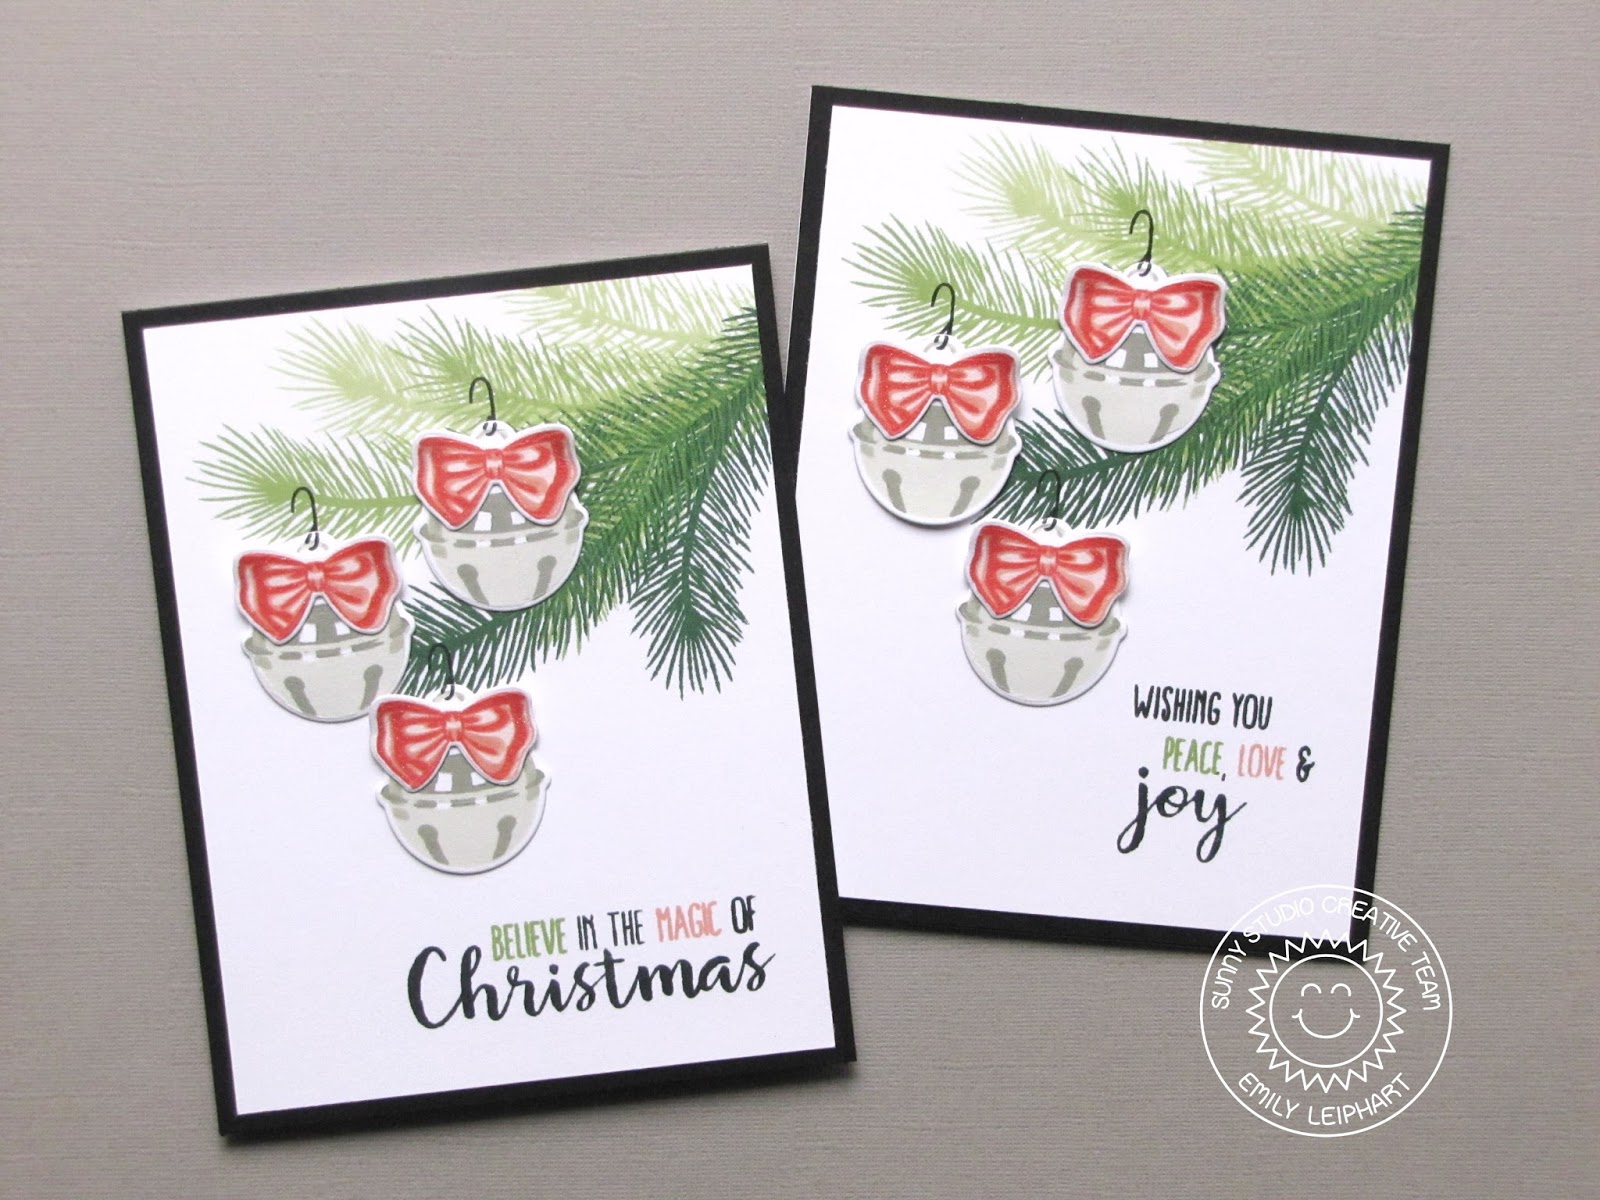 Details about   Jingle Bells Christmas card with envelope and Bell